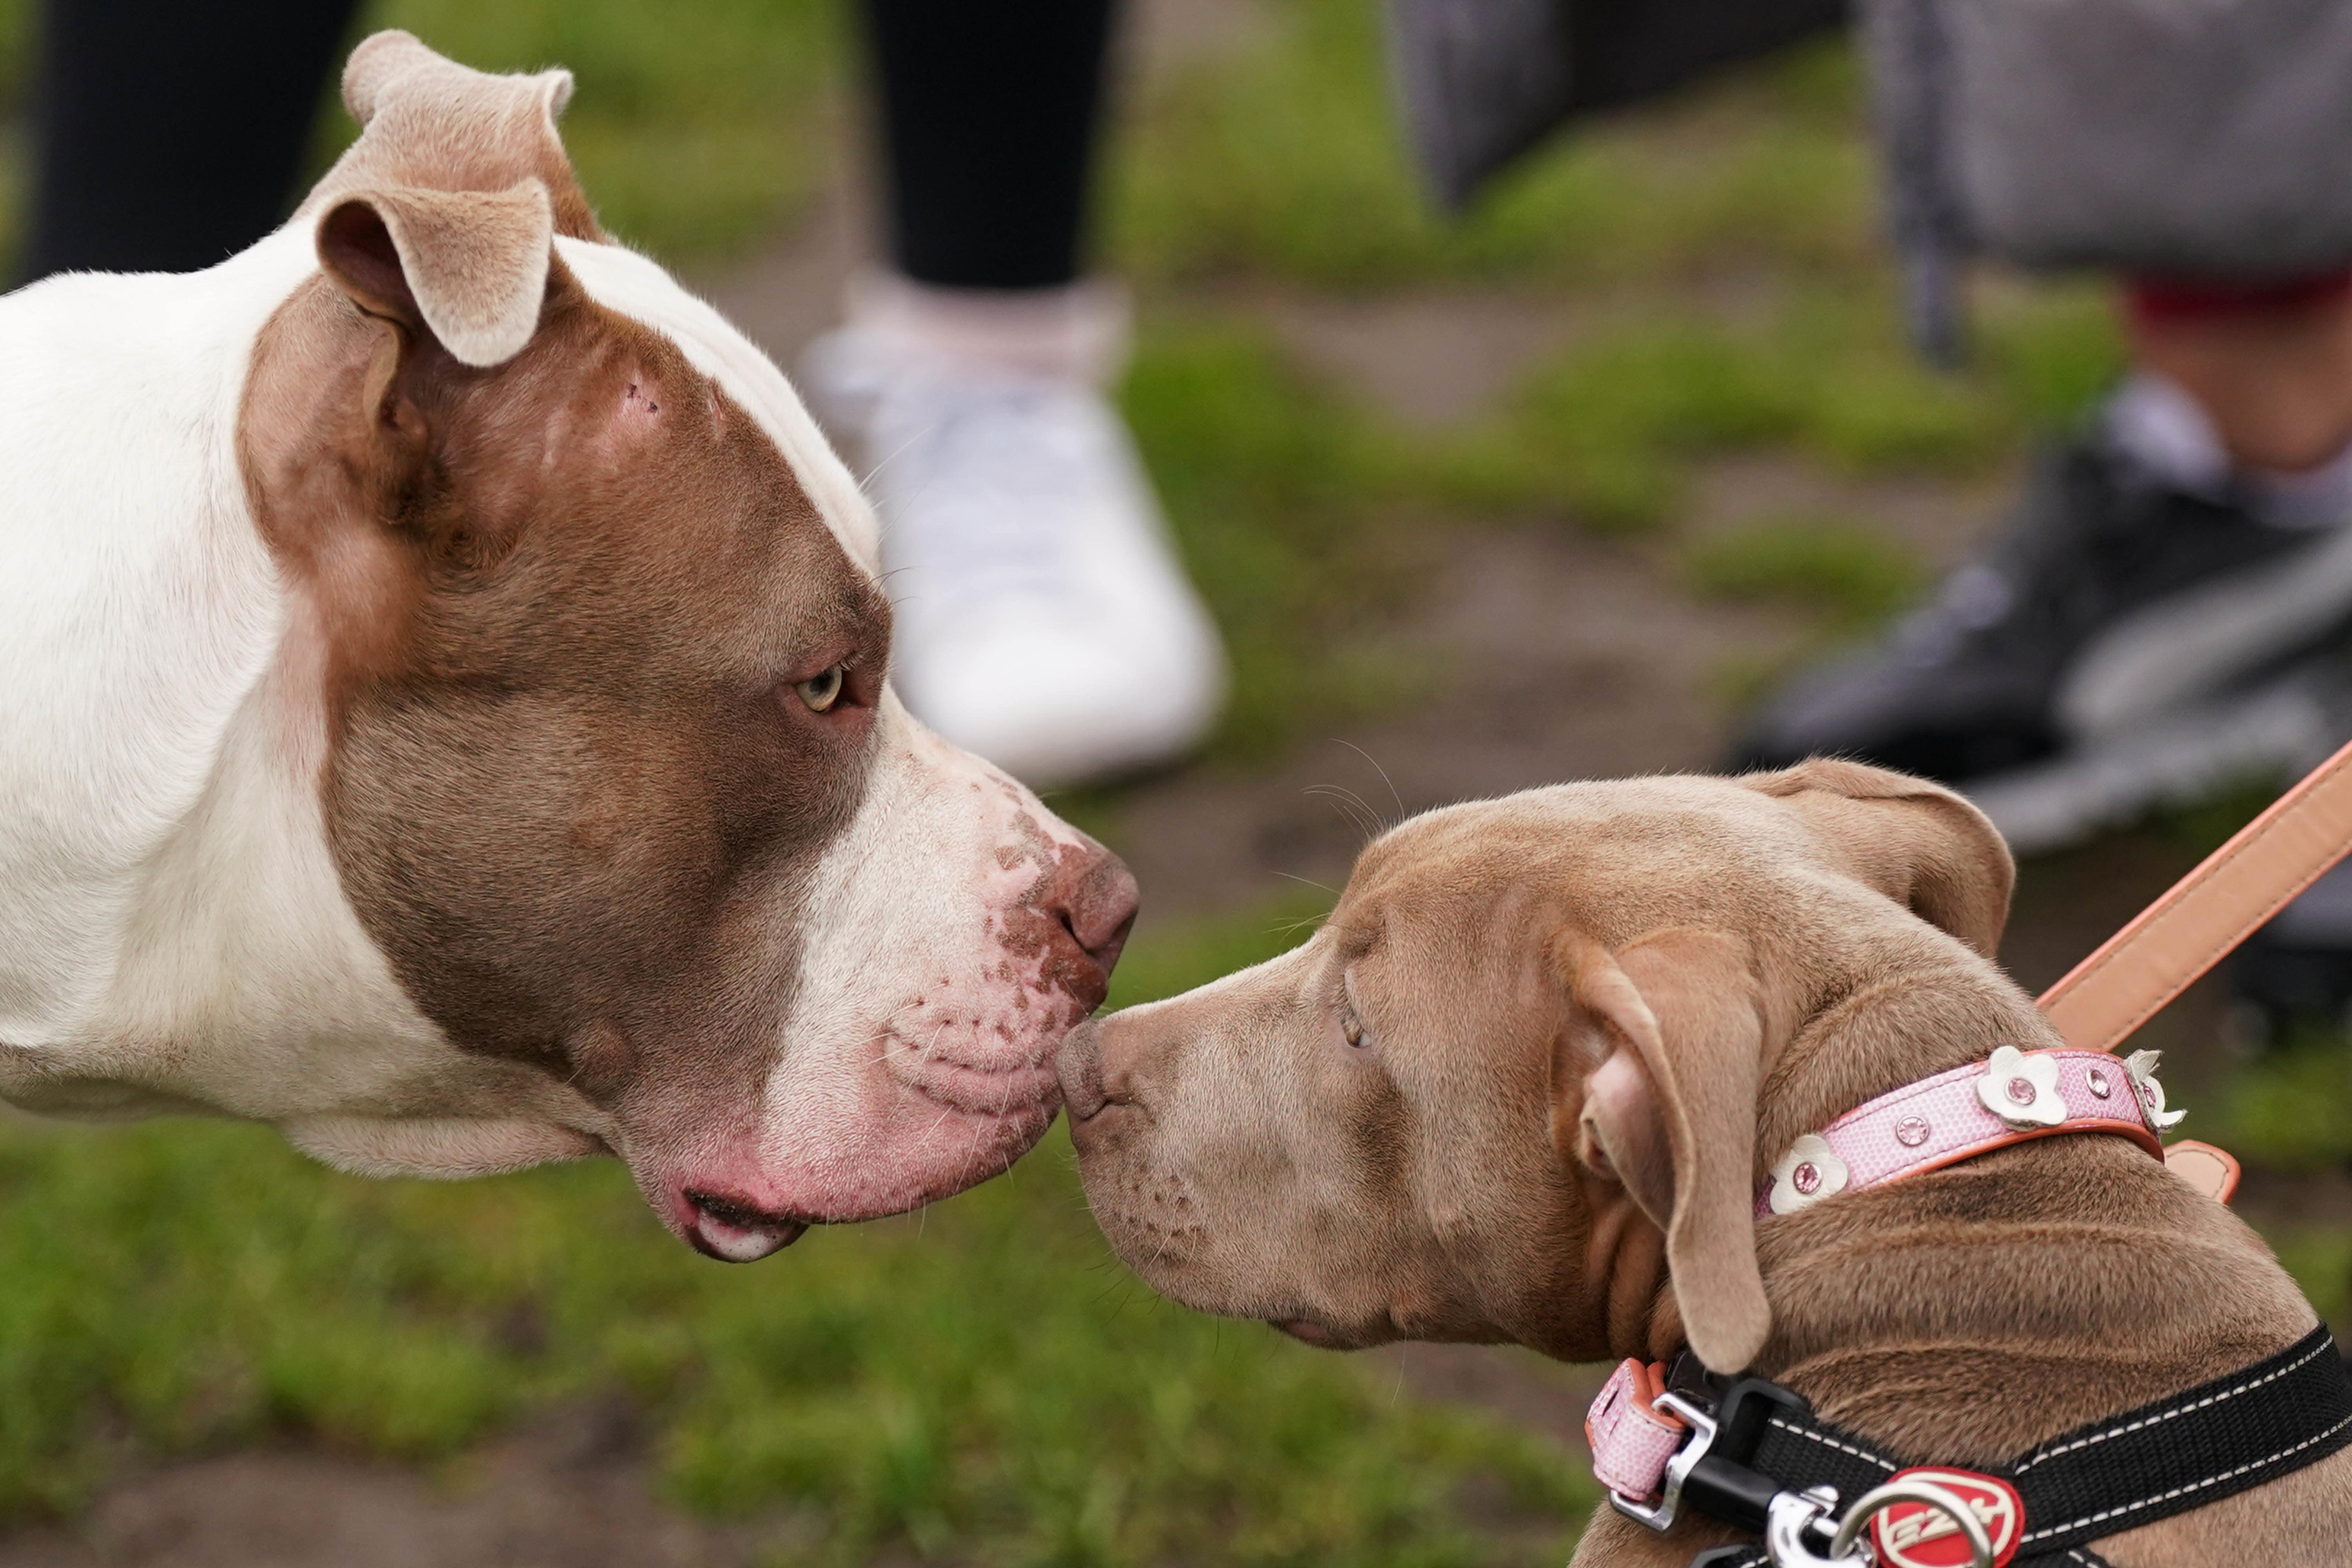 Animal charities including the RSPCA have been pushing for an end to breed-specific bans